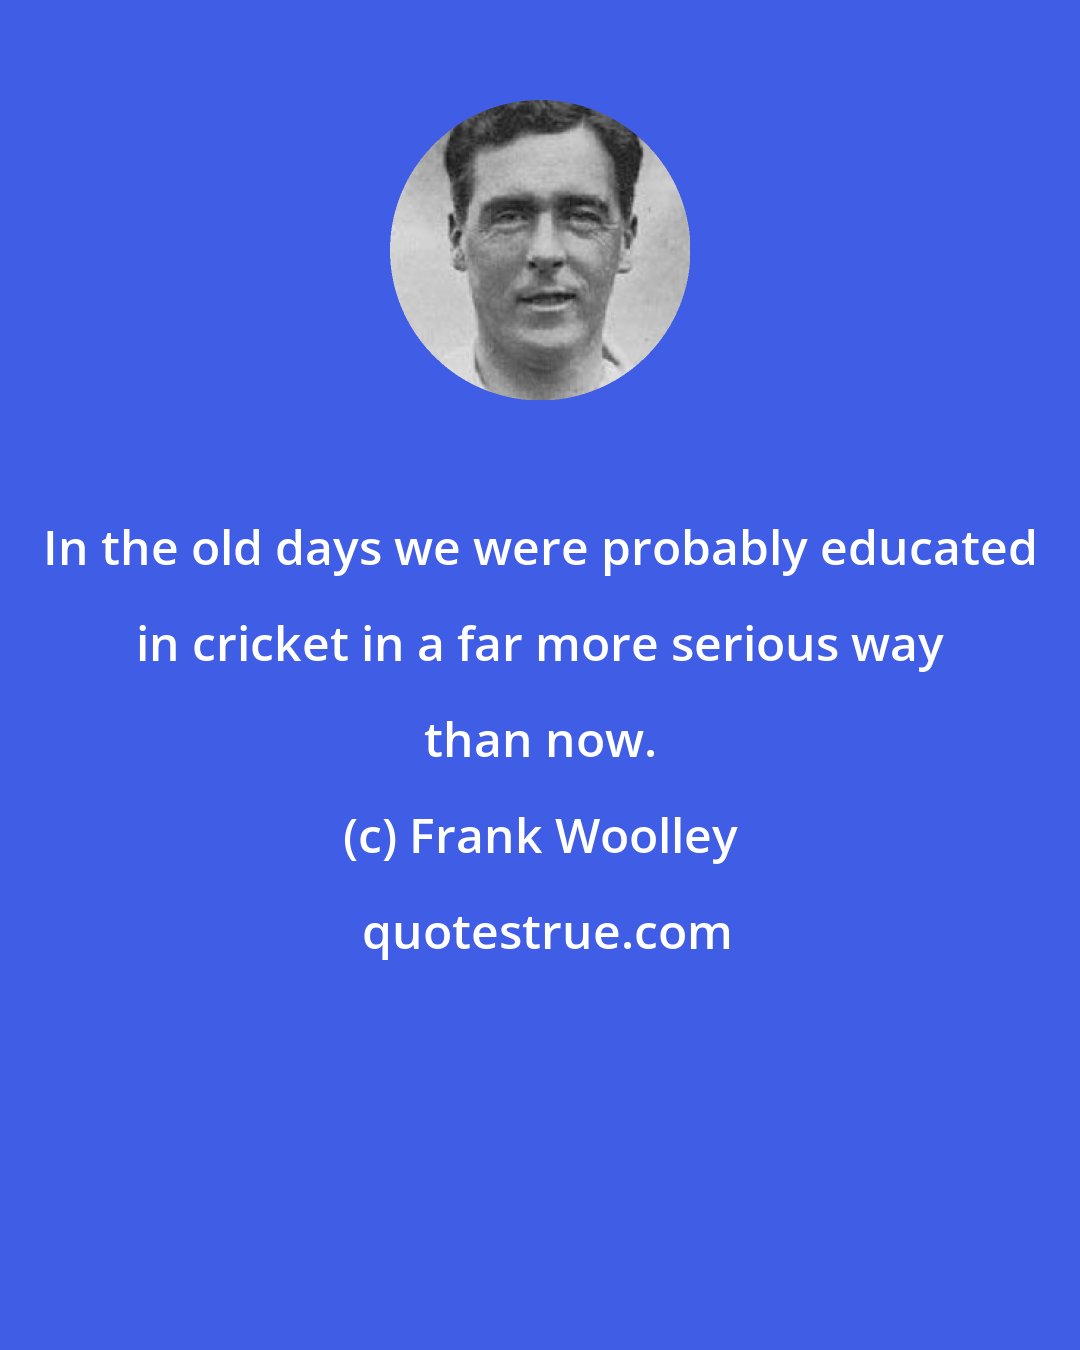 Frank Woolley: In the old days we were probably educated in cricket in a far more serious way than now.